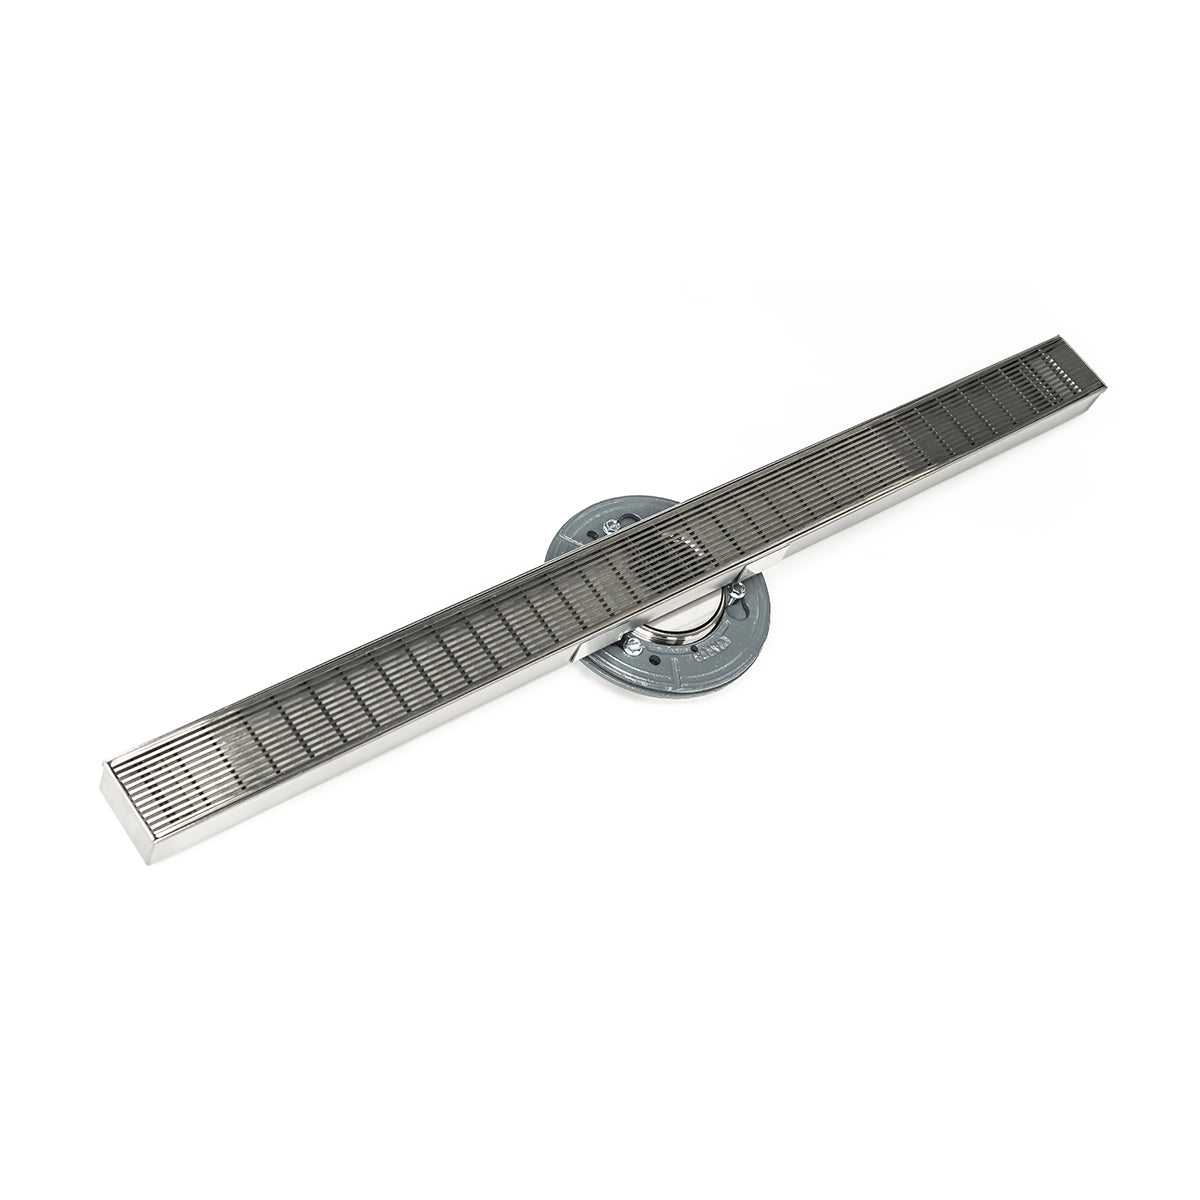 Infinity Drain 48" S-Stainless Steel Series High Flow Site Sizable Linear Drain Kit with 2 1/2" Wedge Wire Grate with Cast Iron Drain Body, 3" No Hub Outlet